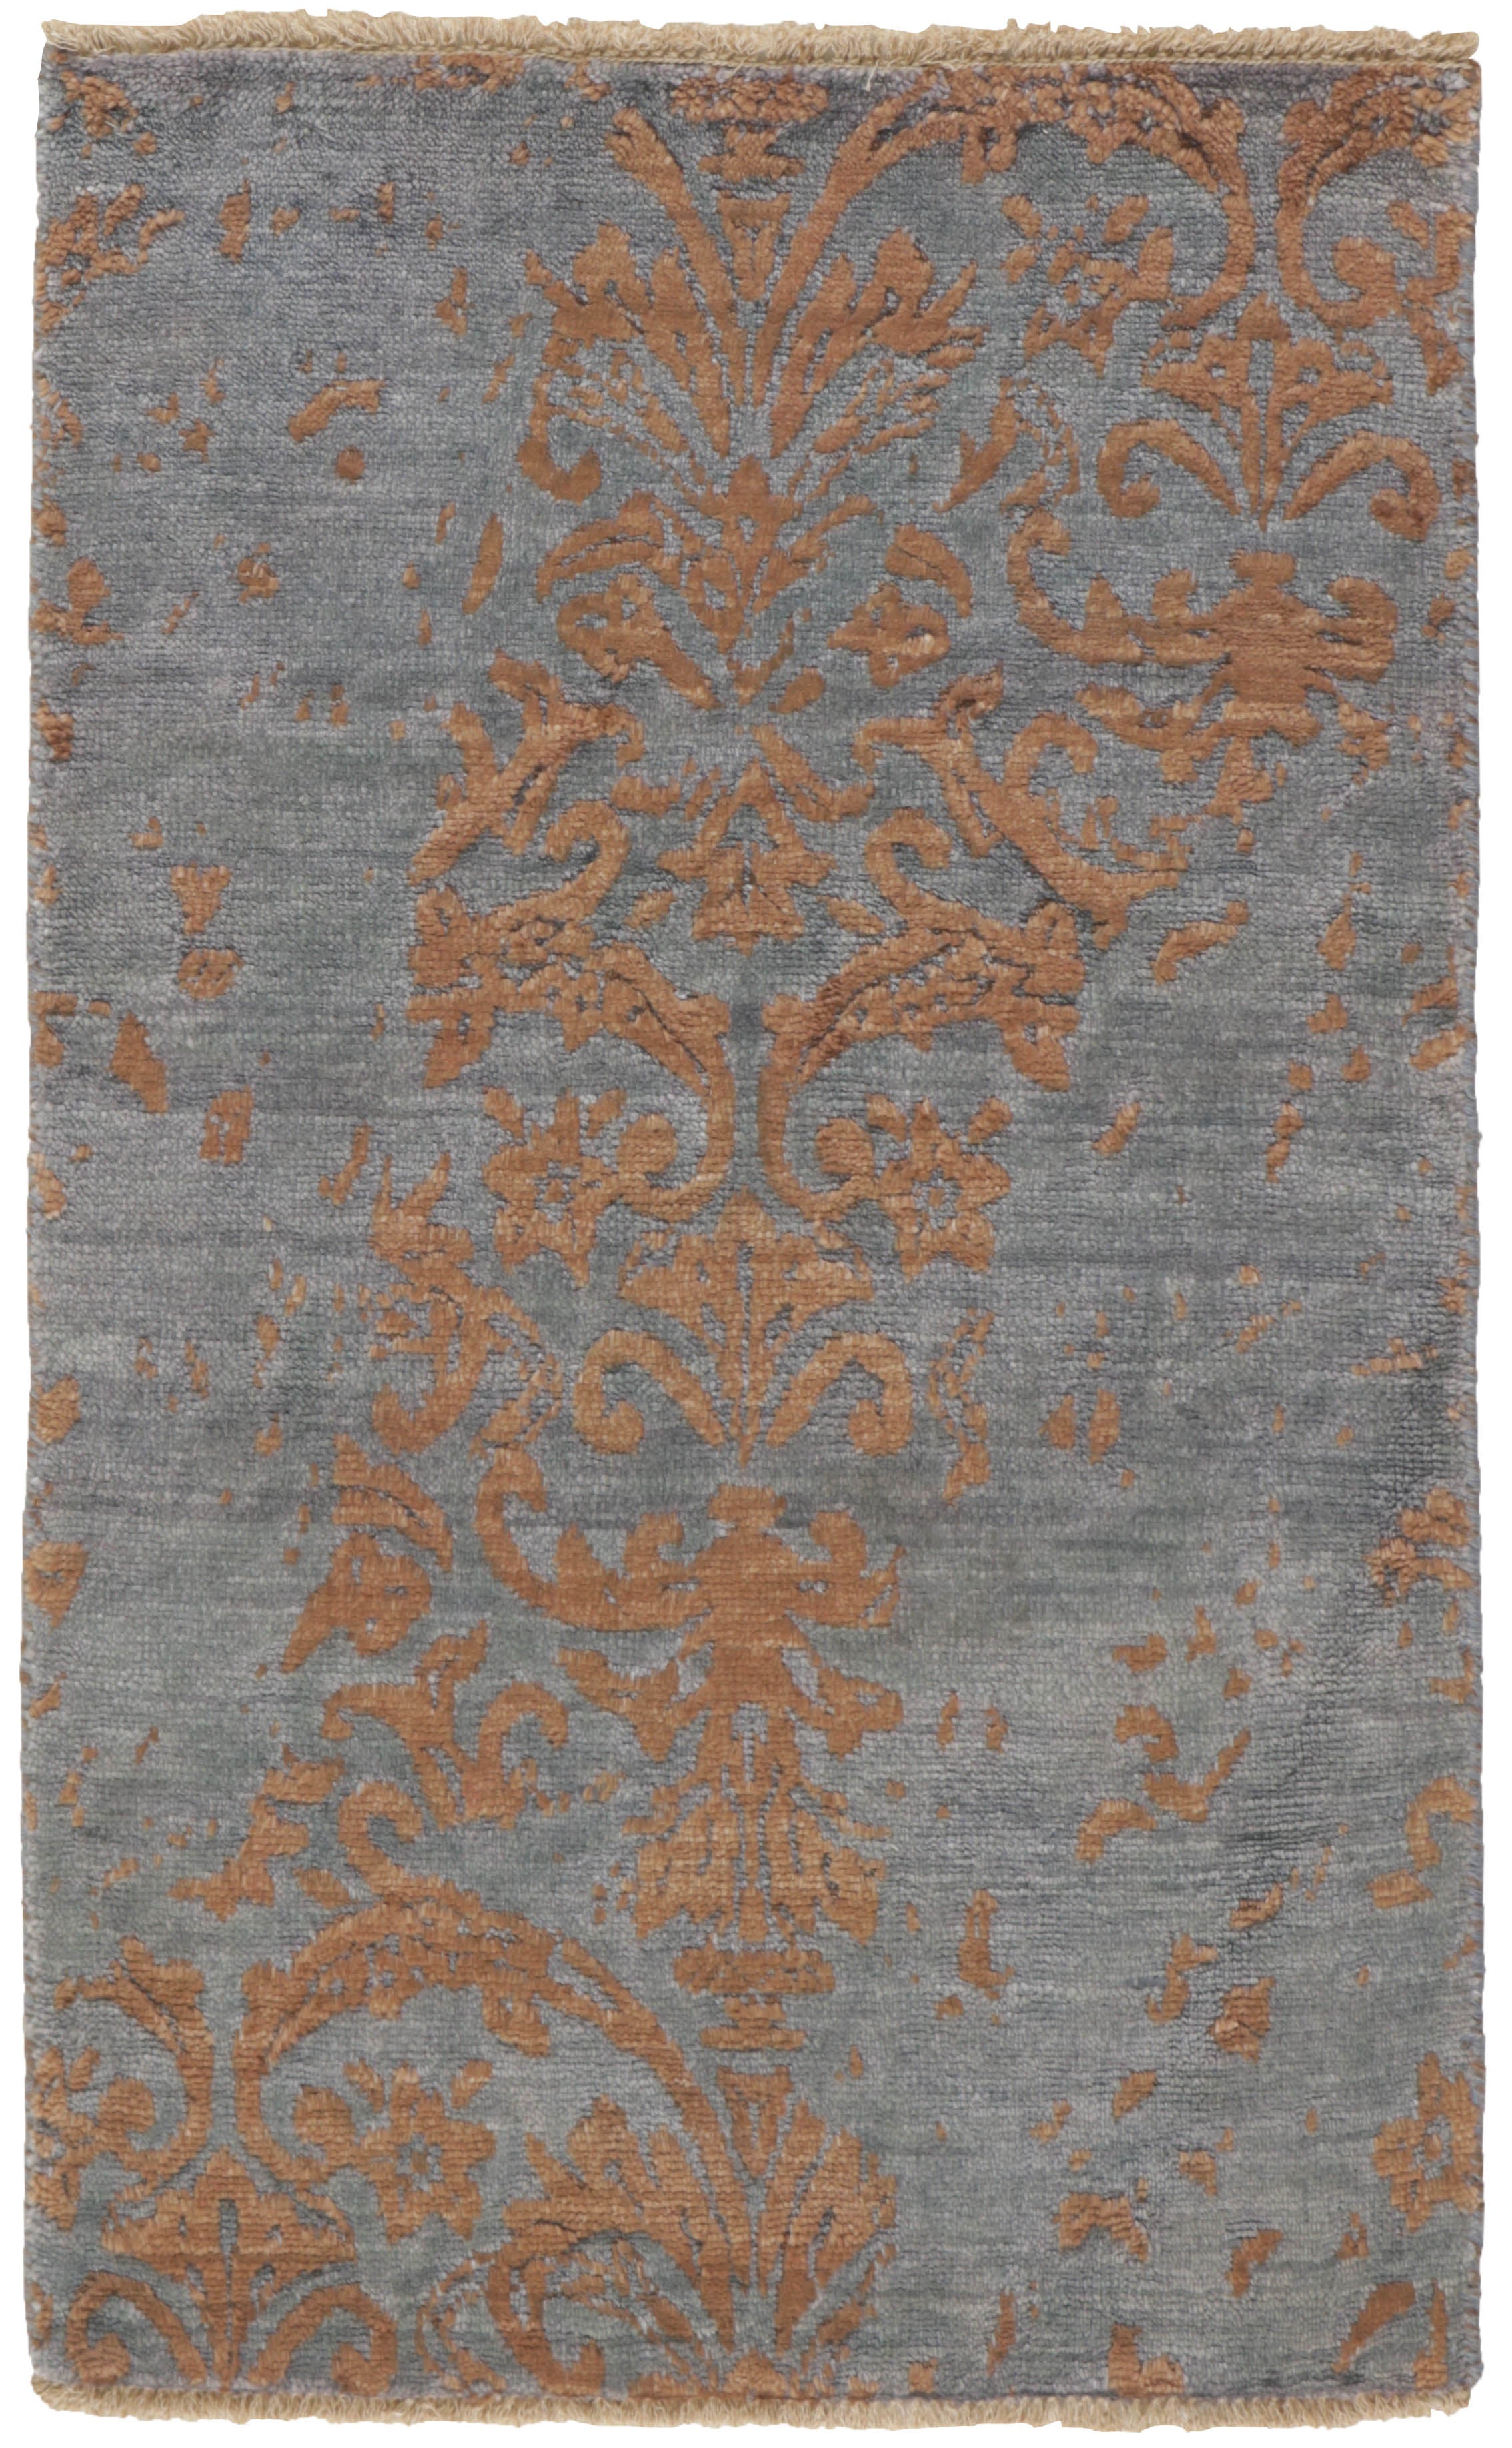 Authentic oriental rug with a damask pattern in blue, brown and grey